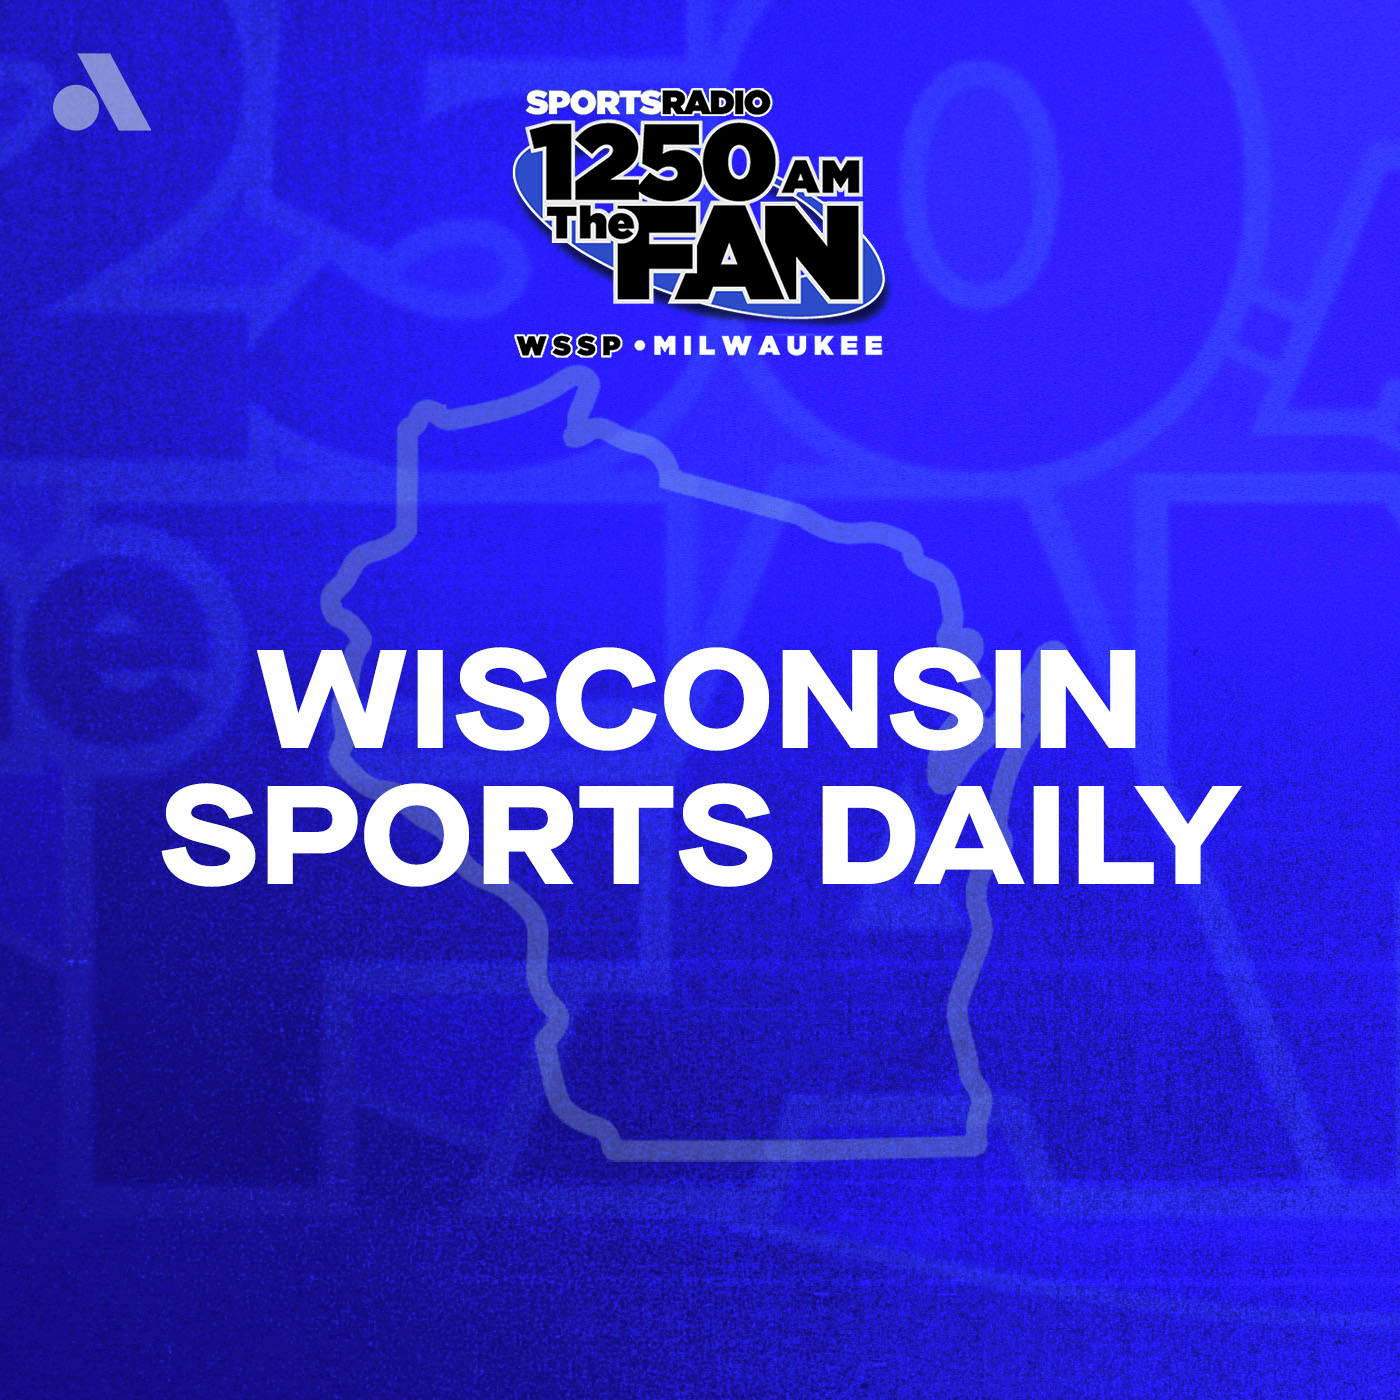 Monday, June 3rd: Bob Brainerd Joins the Wisconsin Sports Daily!